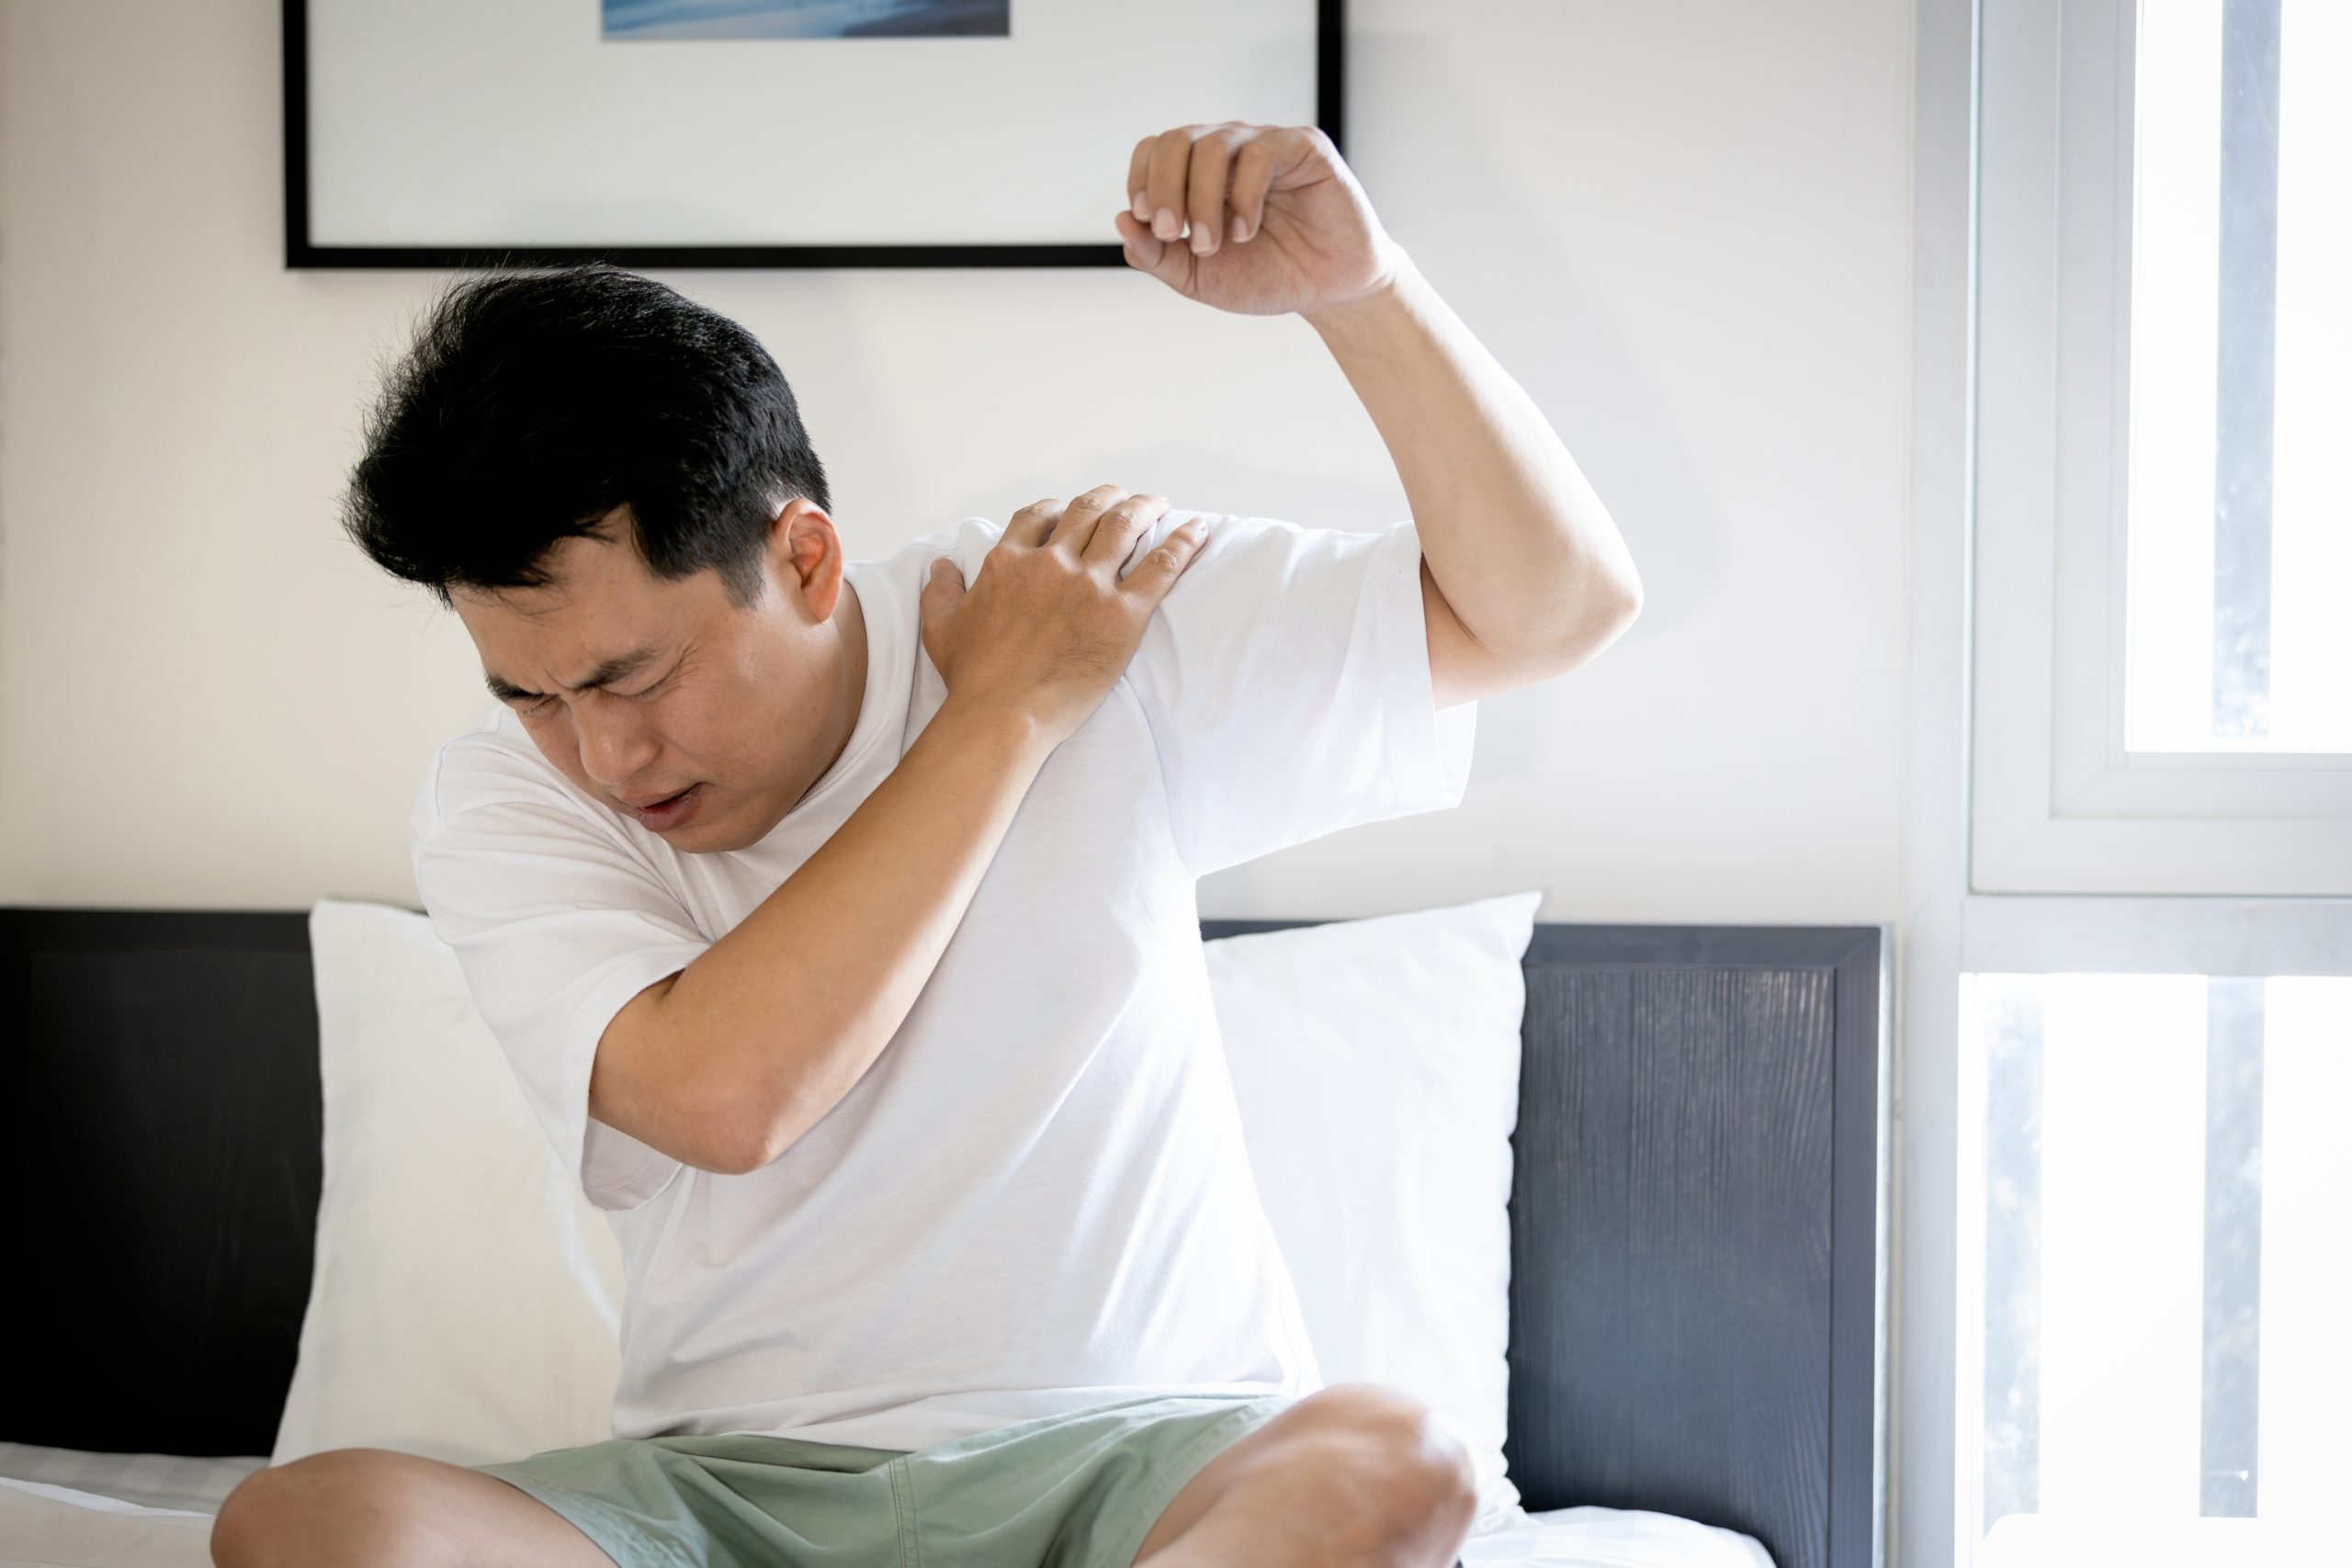 Chiropractic Care For Shoulder Pain Near Snohomish County, WA